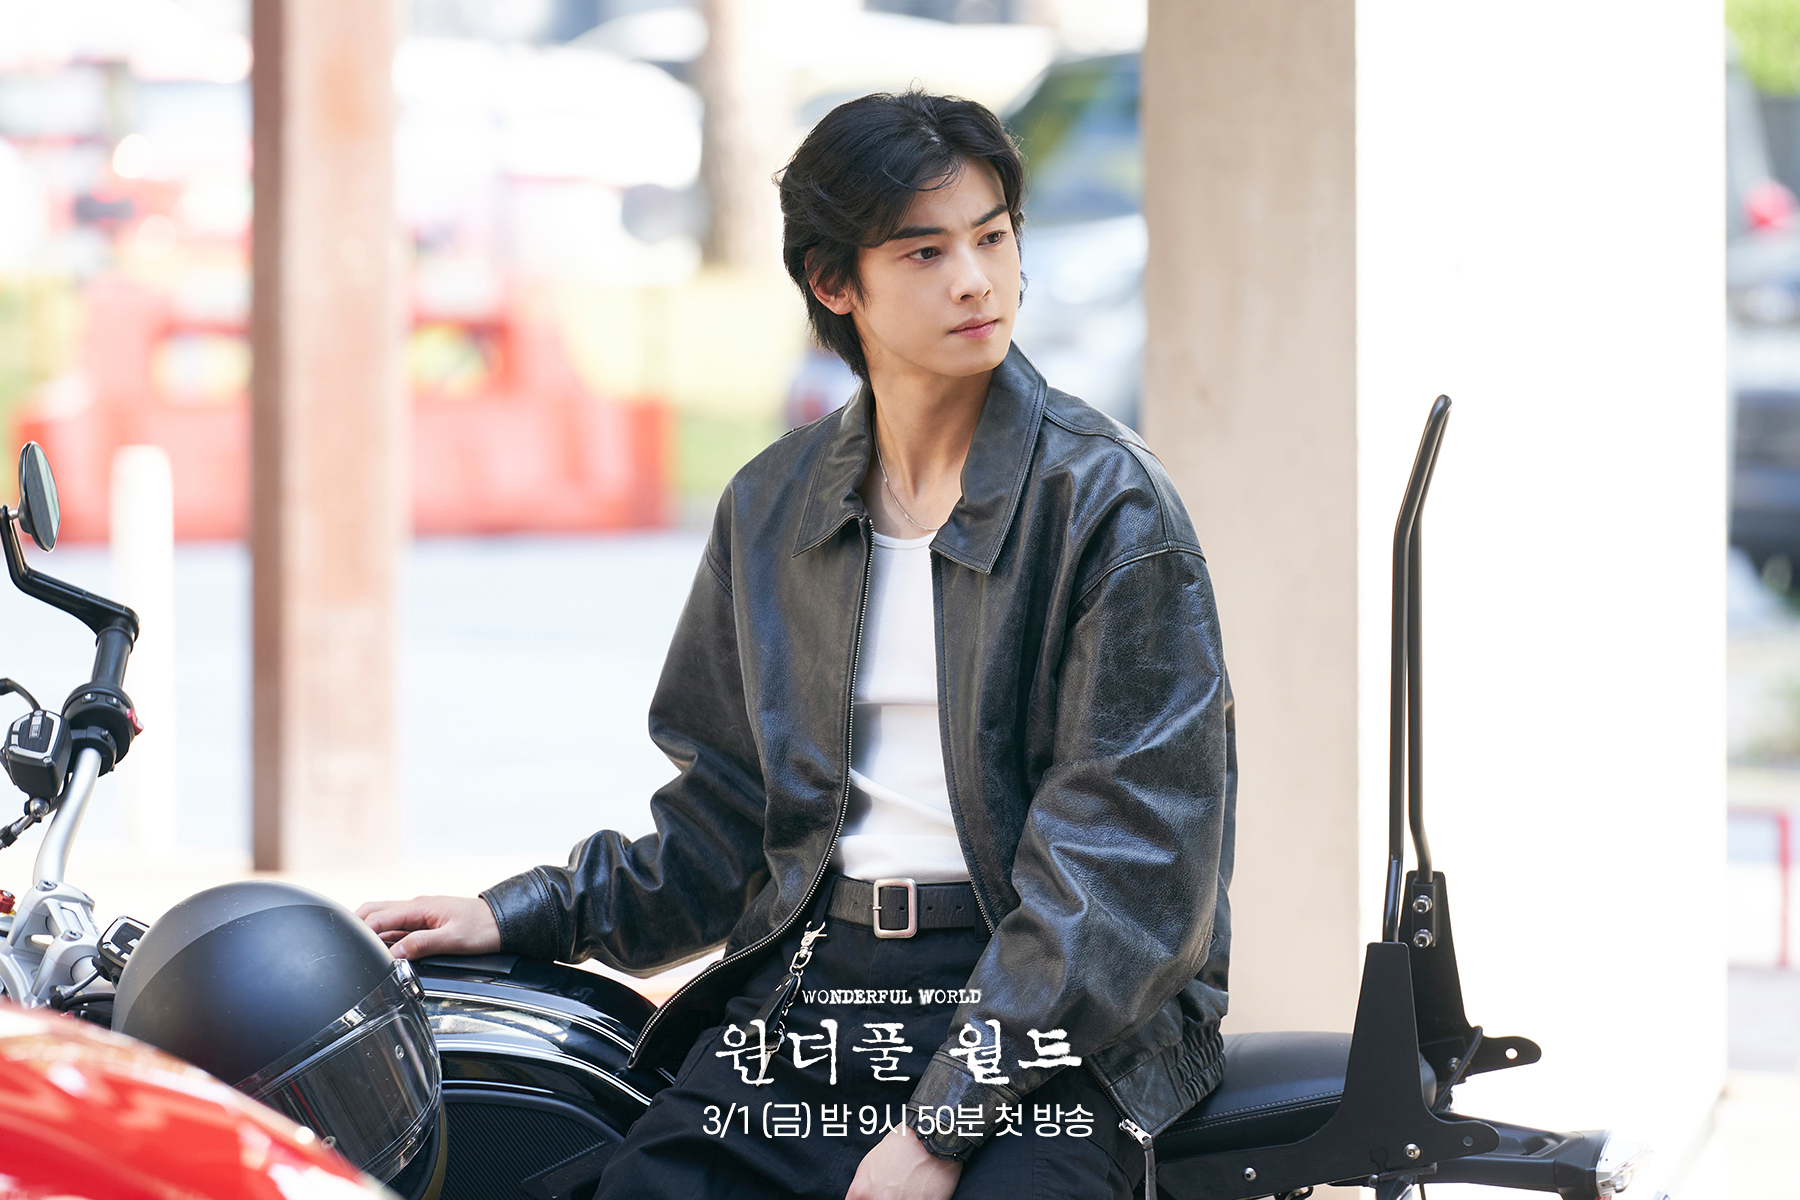 Cha Eun Woo Leads A Rough Double Life In “Wonderful World”